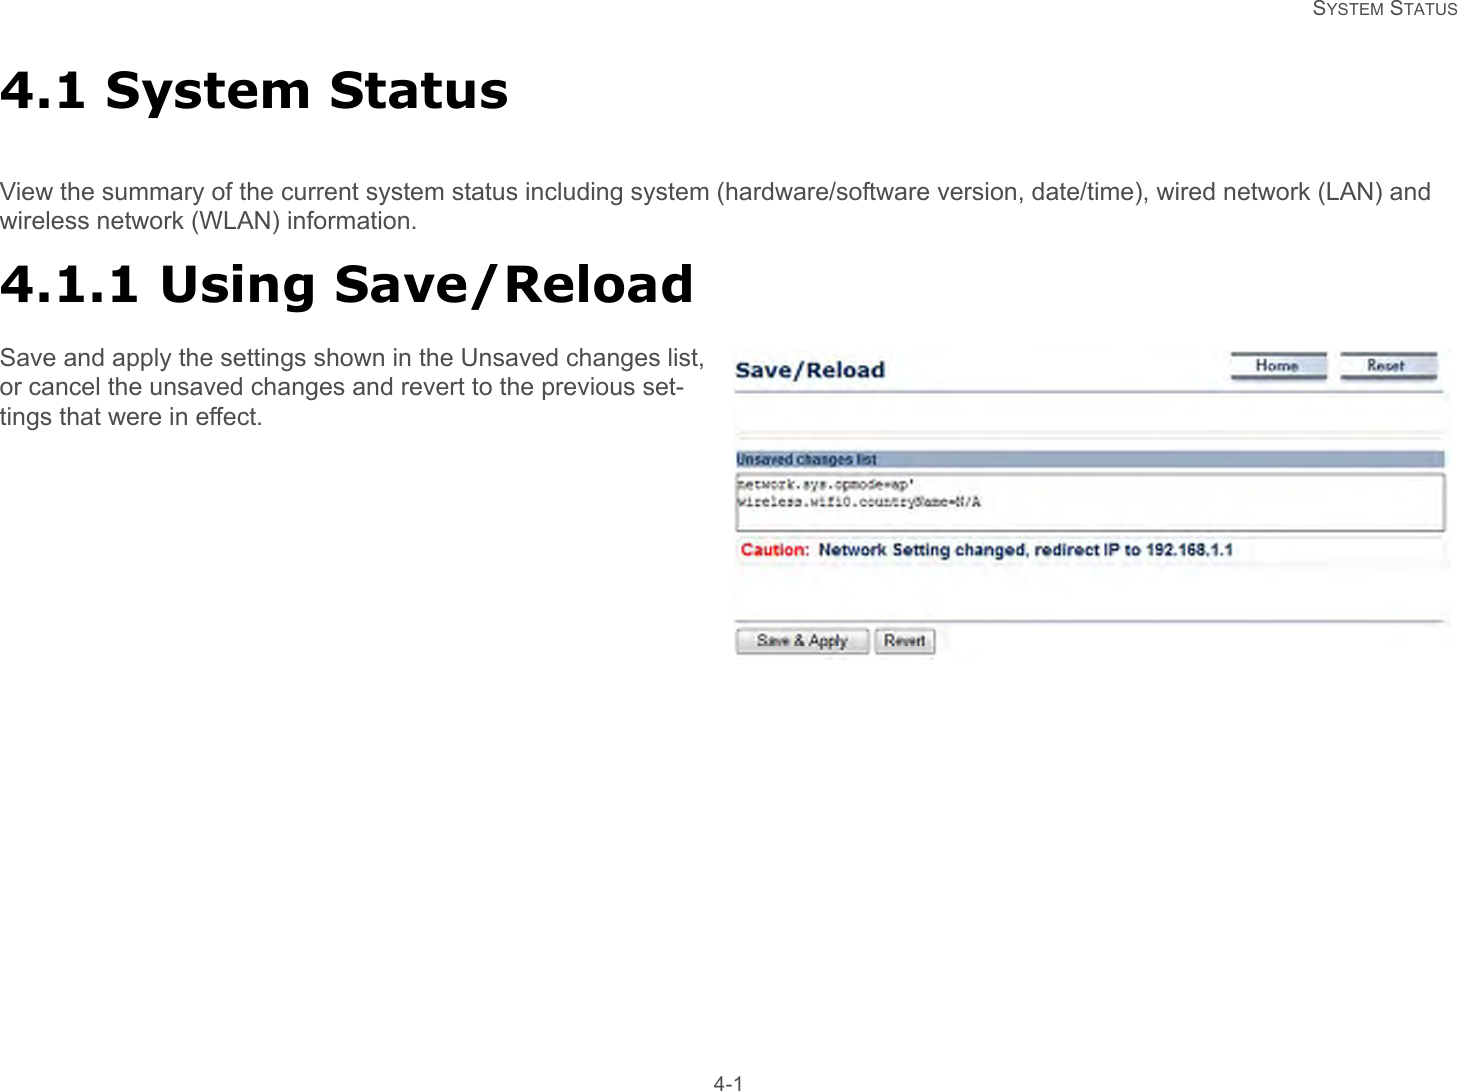   SYSTEM STATUS 4-14.1 System StatusView the summary of the current system status including system (hardware/software version, date/time), wired network (LAN) and wireless network (WLAN) information.4.1.1 Using Save/ReloadSave and apply the settings shown in the Unsaved changes list, or cancel the unsaved changes and revert to the previous set-tings that were in effect.